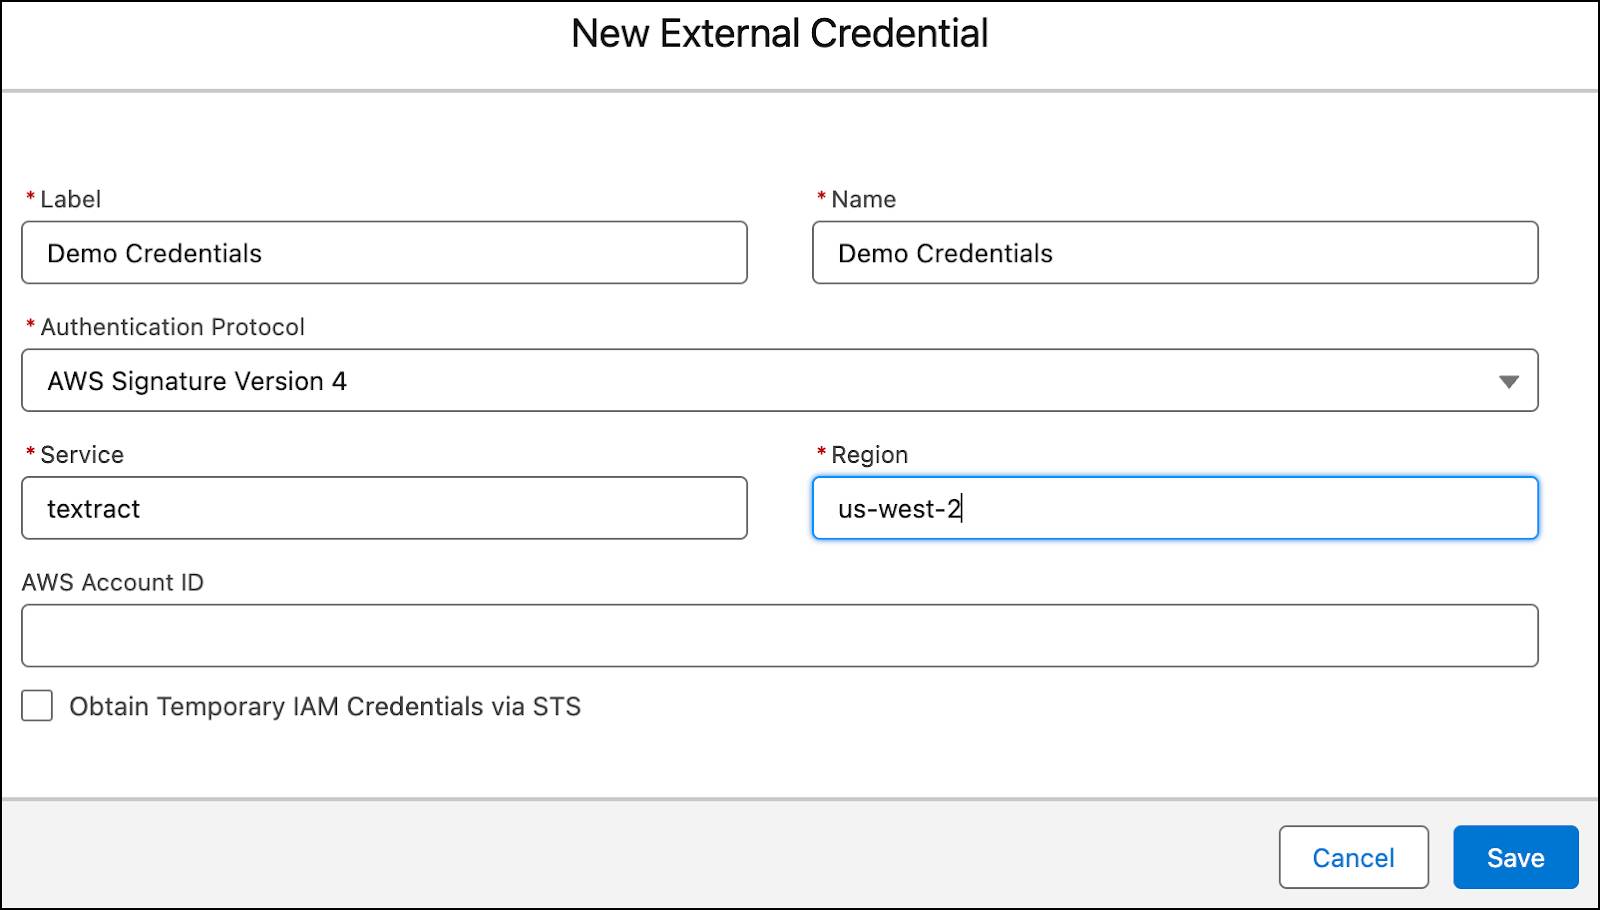 The New External Credential window showing the details of the external credential.